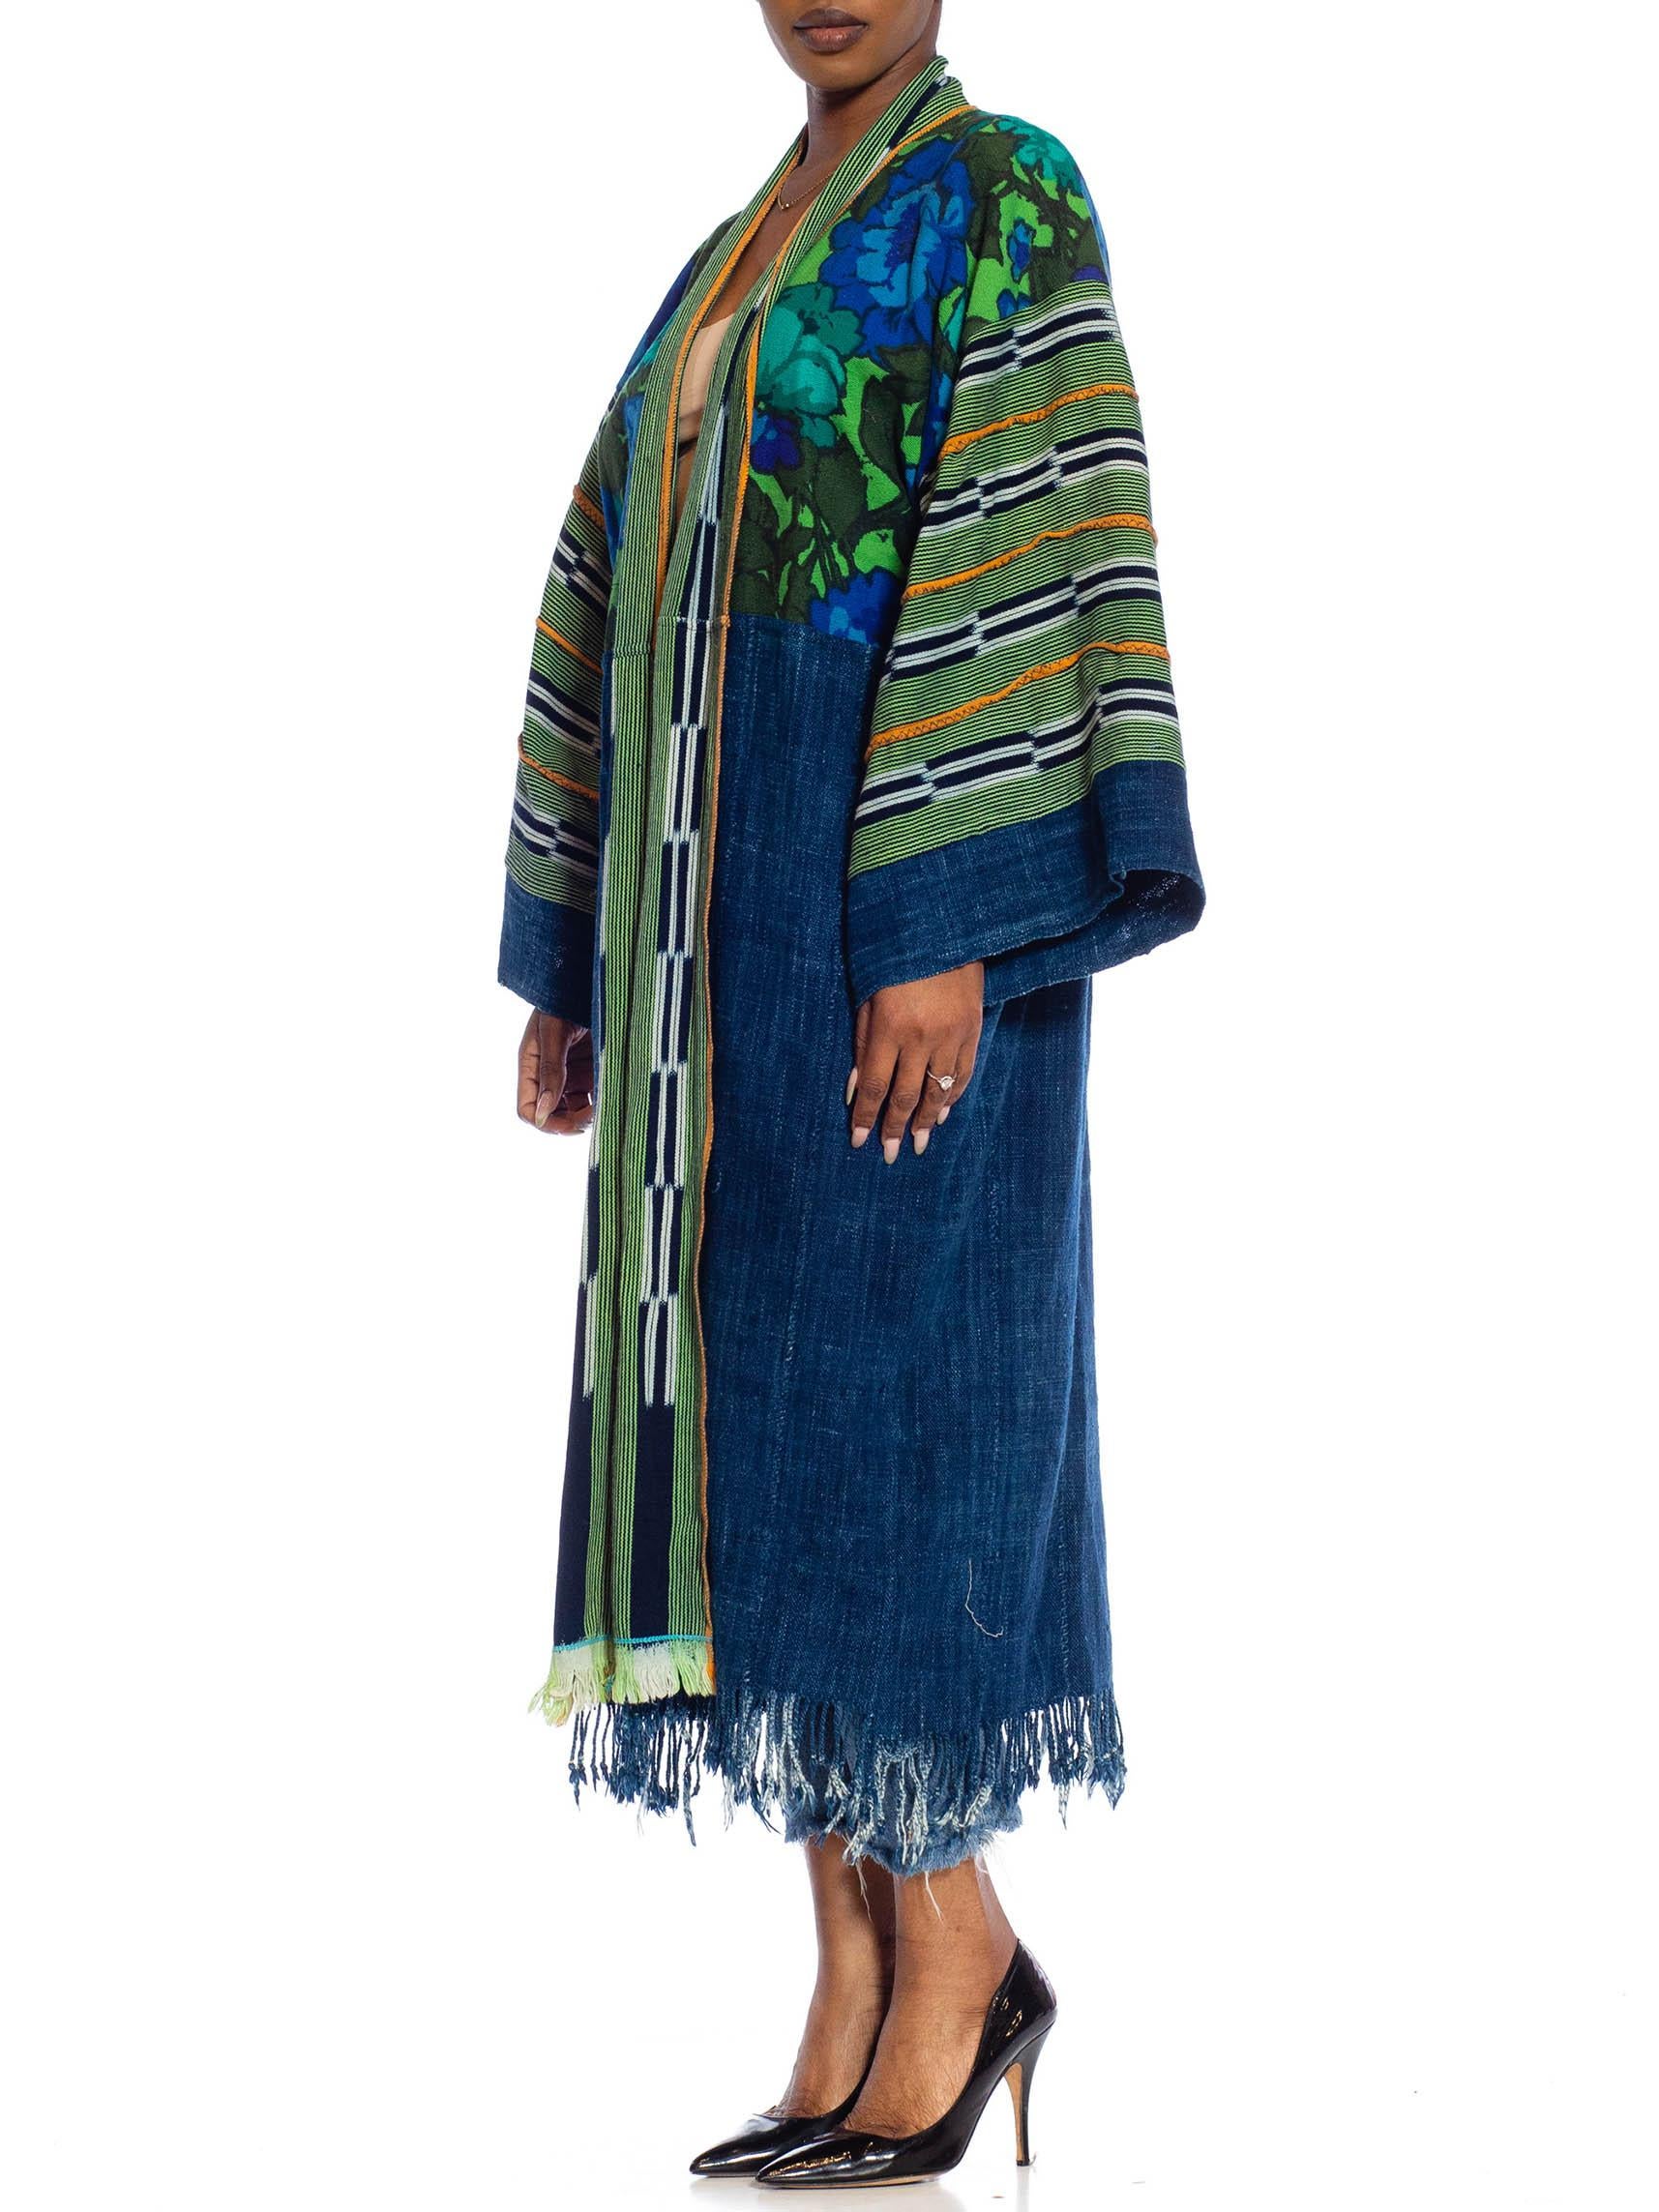 Black MORPHEW COLLECTION Navy Blue & Green African Cotton Vintage 1960S Floral Duster